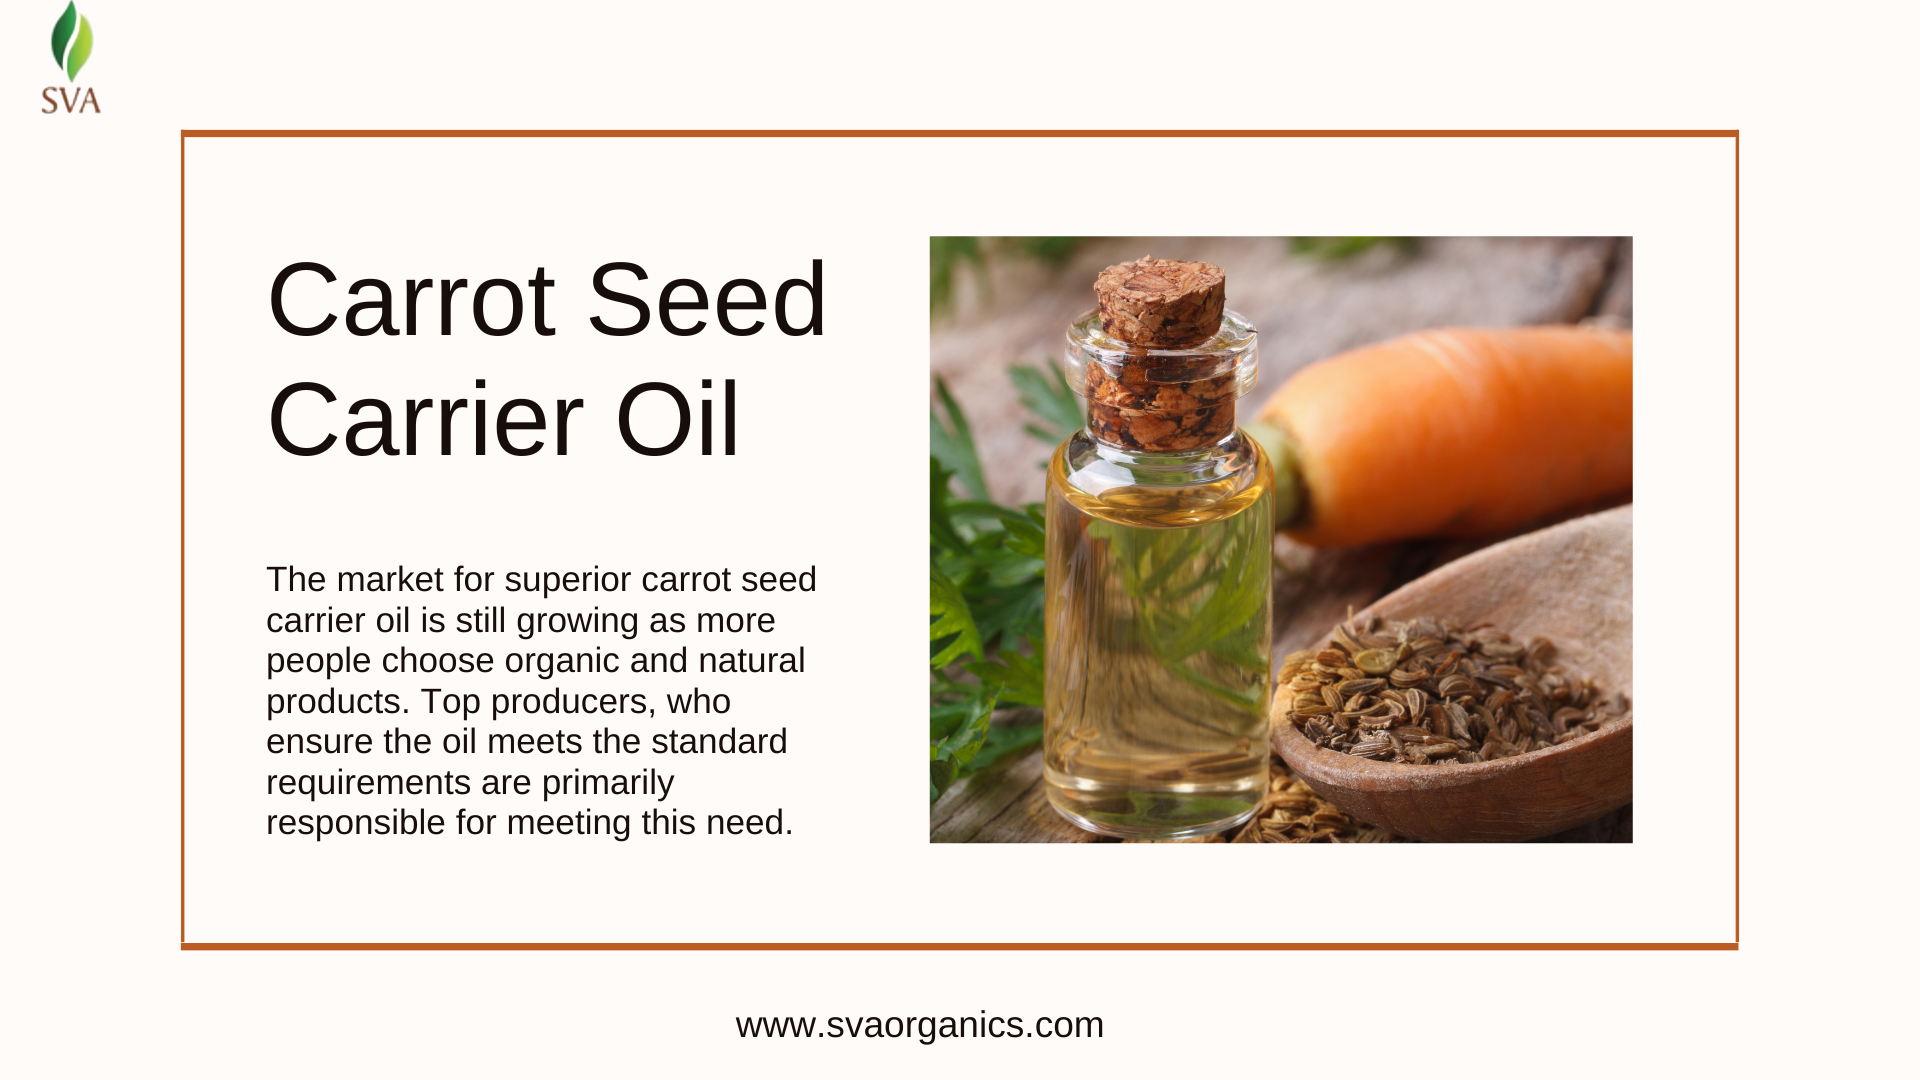 Carrot Seed Carrier Oil by Top Manufacturers – SVA Organics